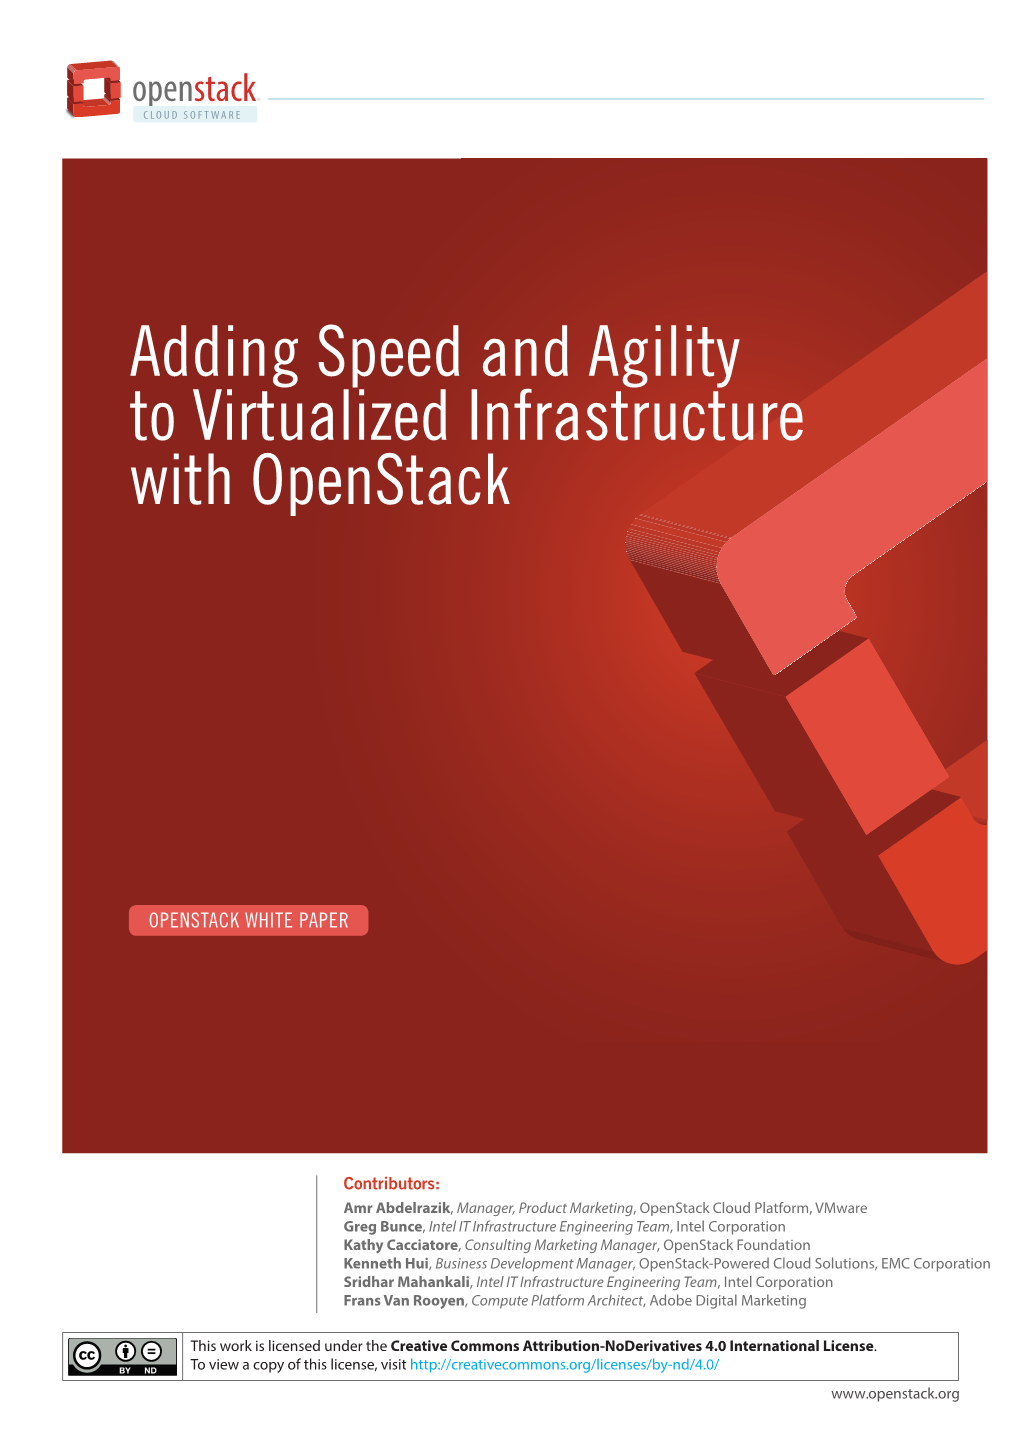 Adding Speed and Agility to Virtualized Infrastructure with Openstack